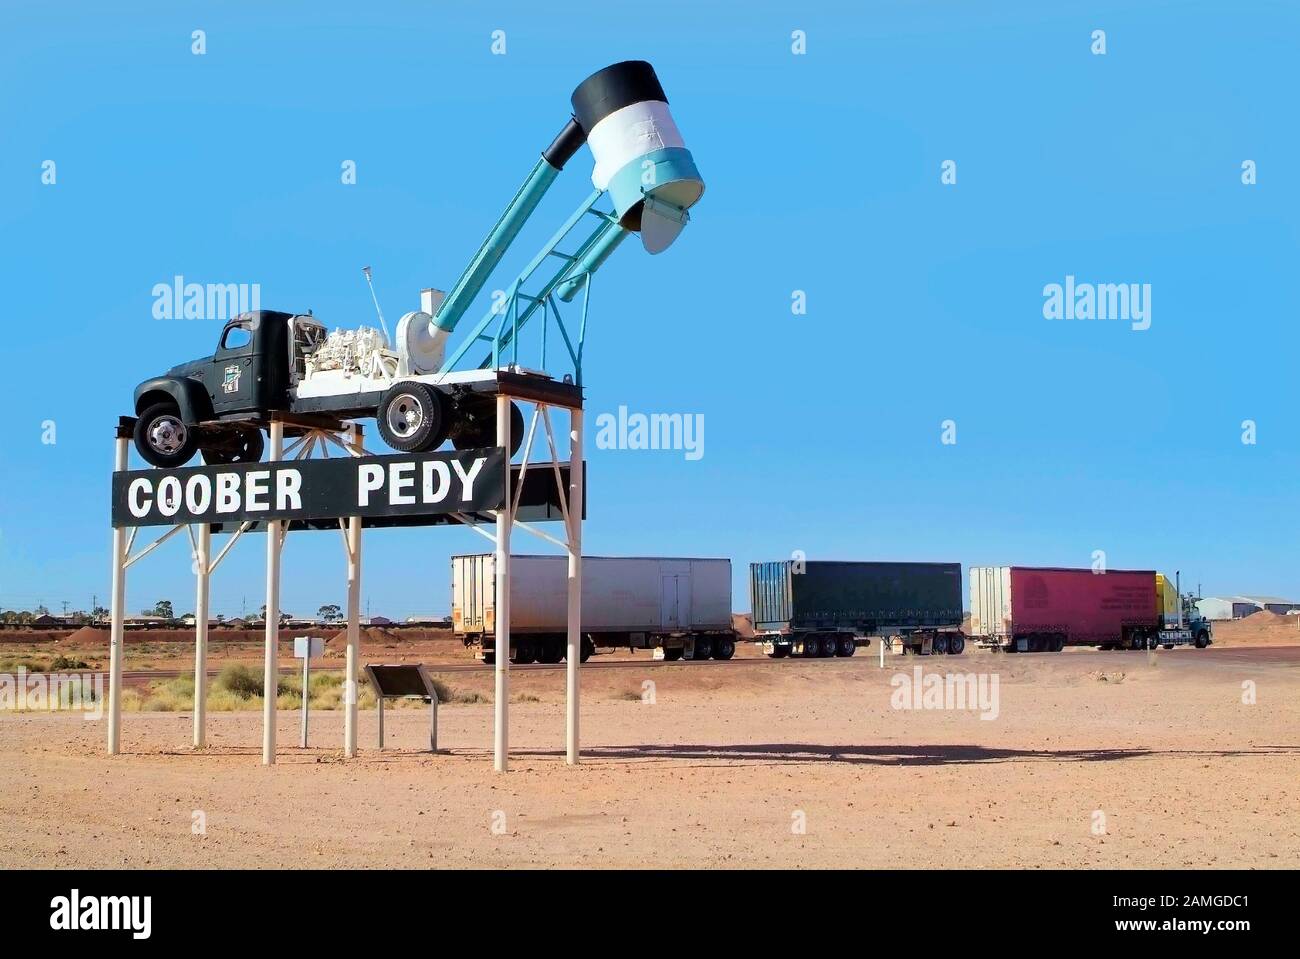 Coober Pedy, Australia - April 13, 2010: Truck with trailers named Road Train on Stuart highway Stock Photo